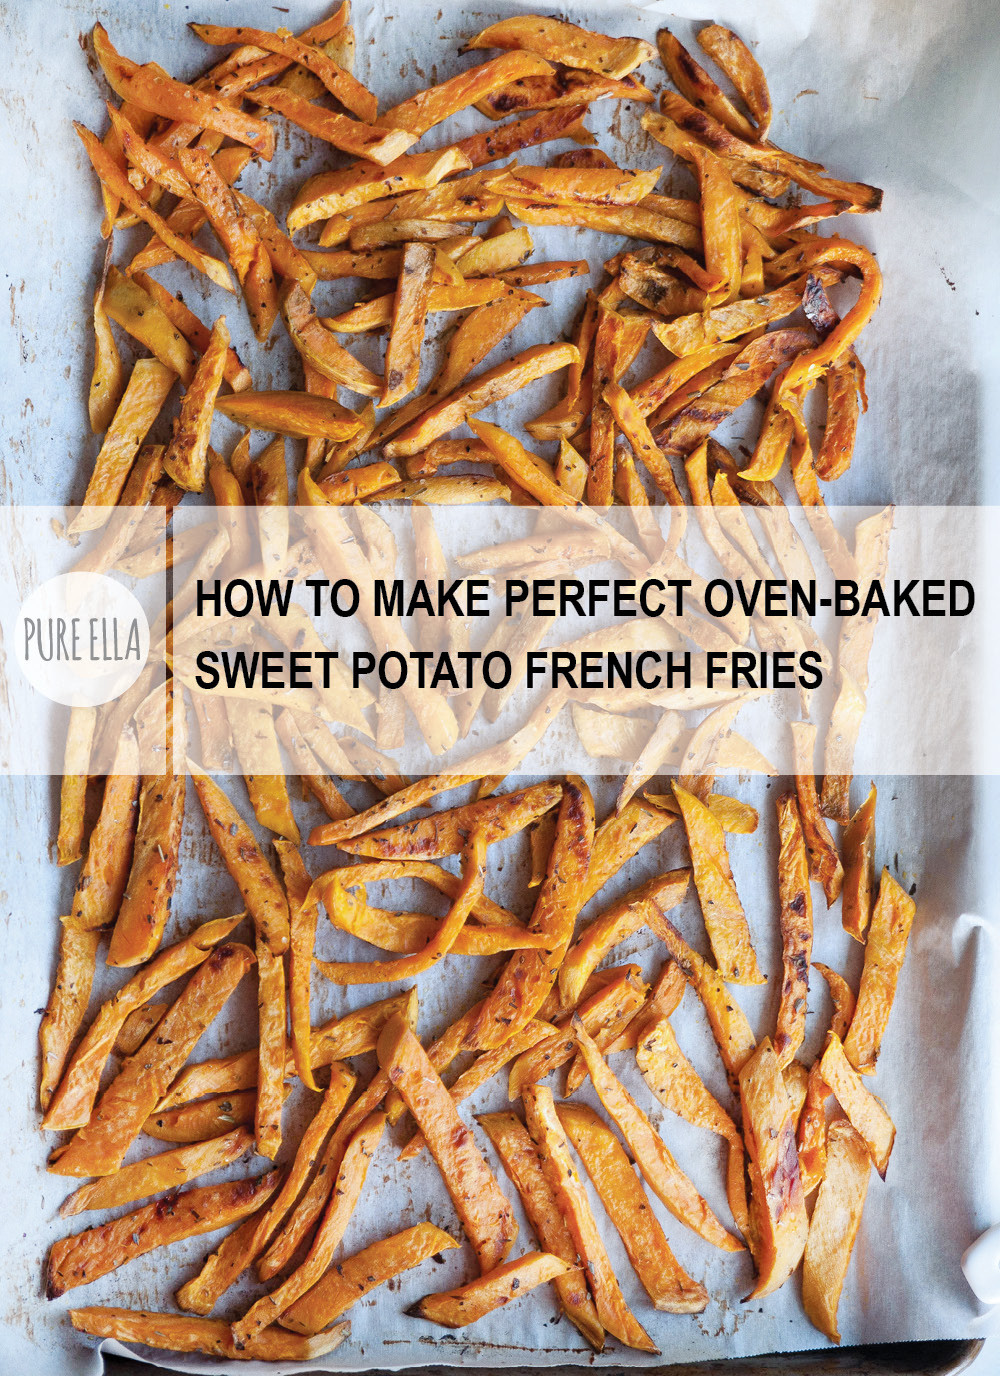 How To Make The Perfect Baked Potato
 How to Make Perfect Oven Baked Sweet Potato French Fries